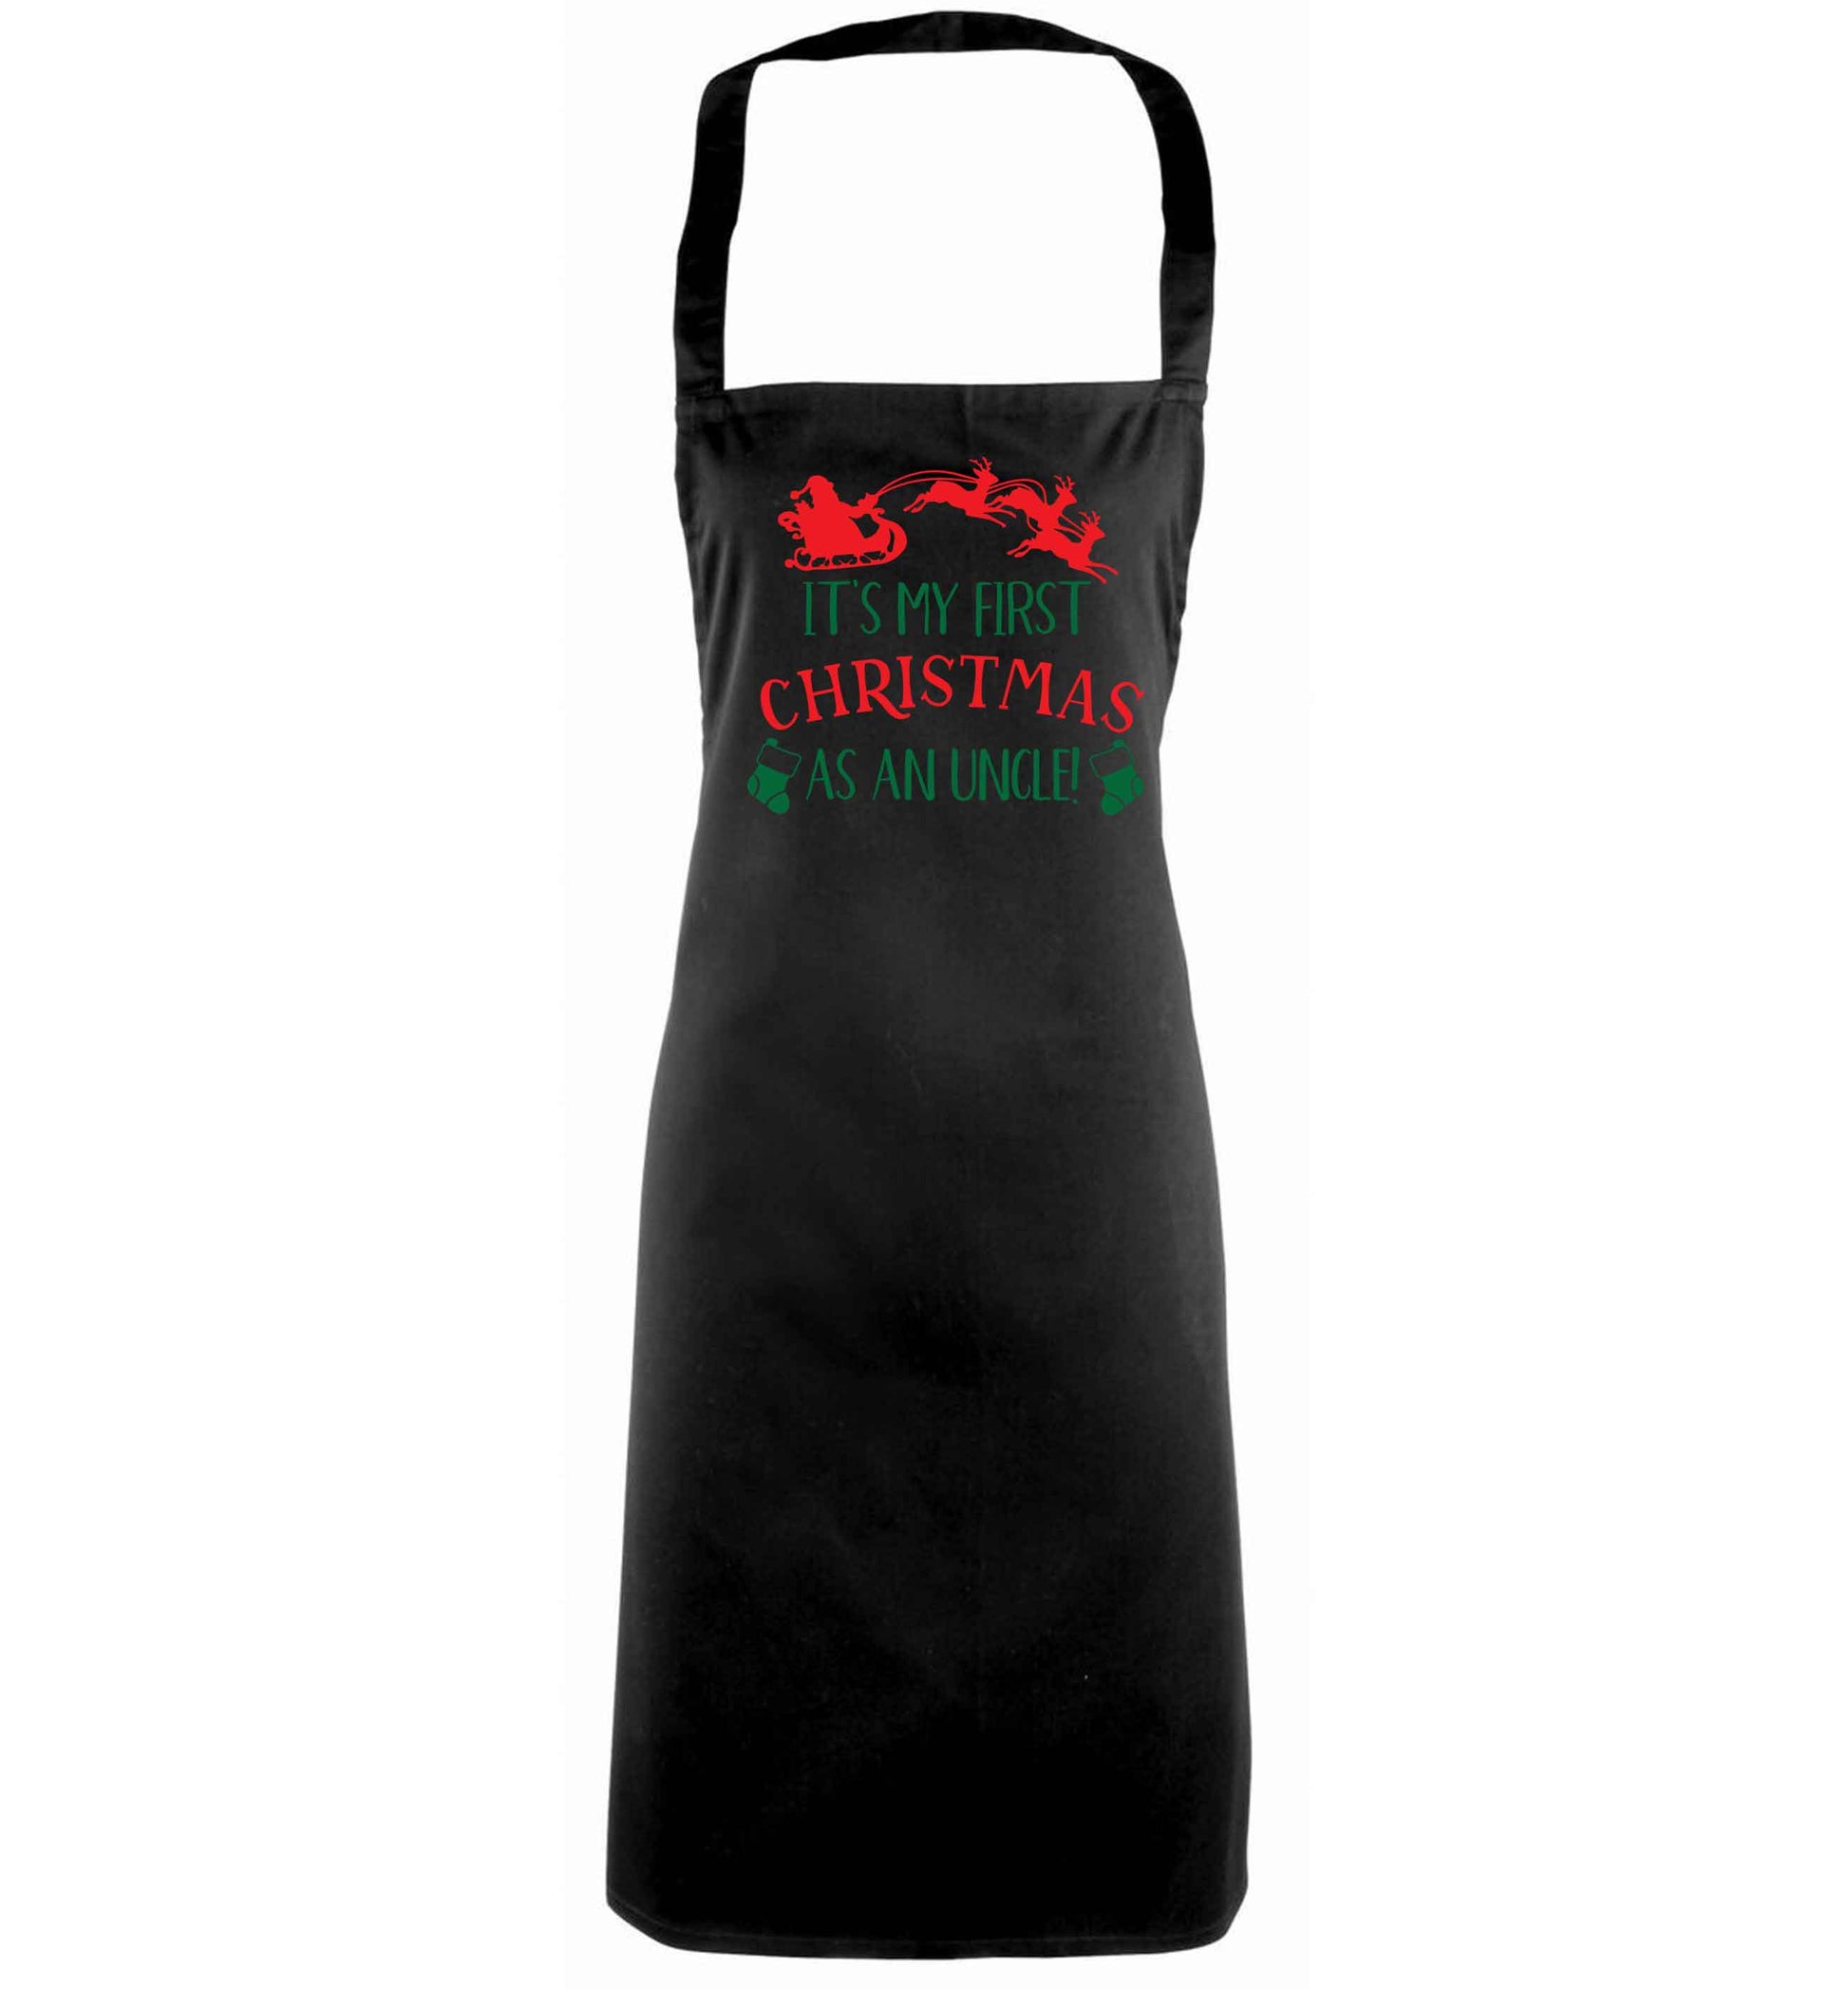 It's my first Christmas as an uncle! black apron